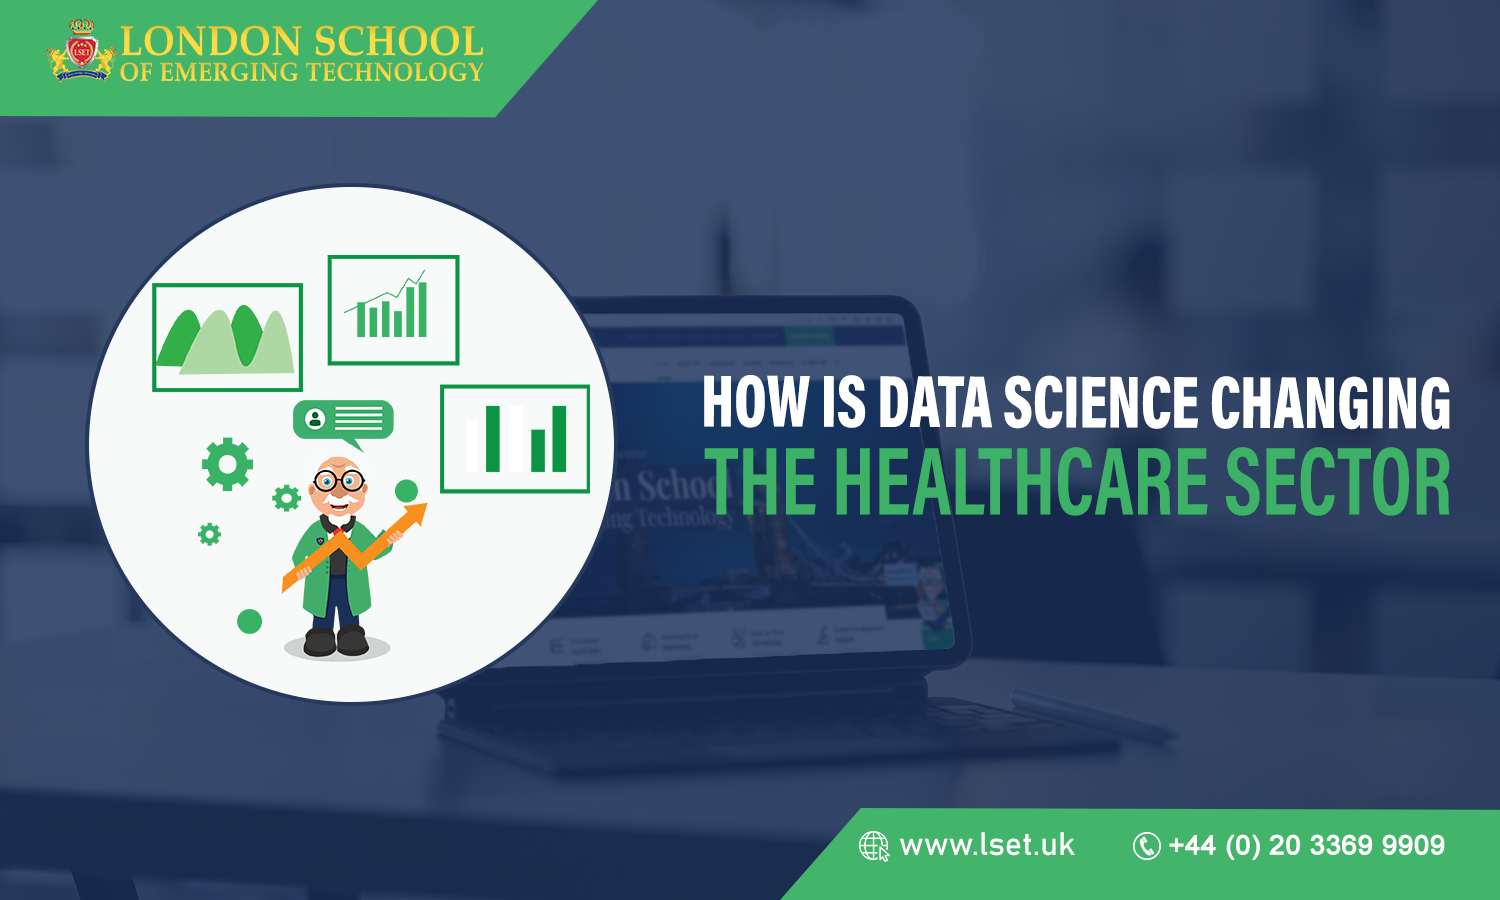 How is Data Science Changing the Healthcare Sector